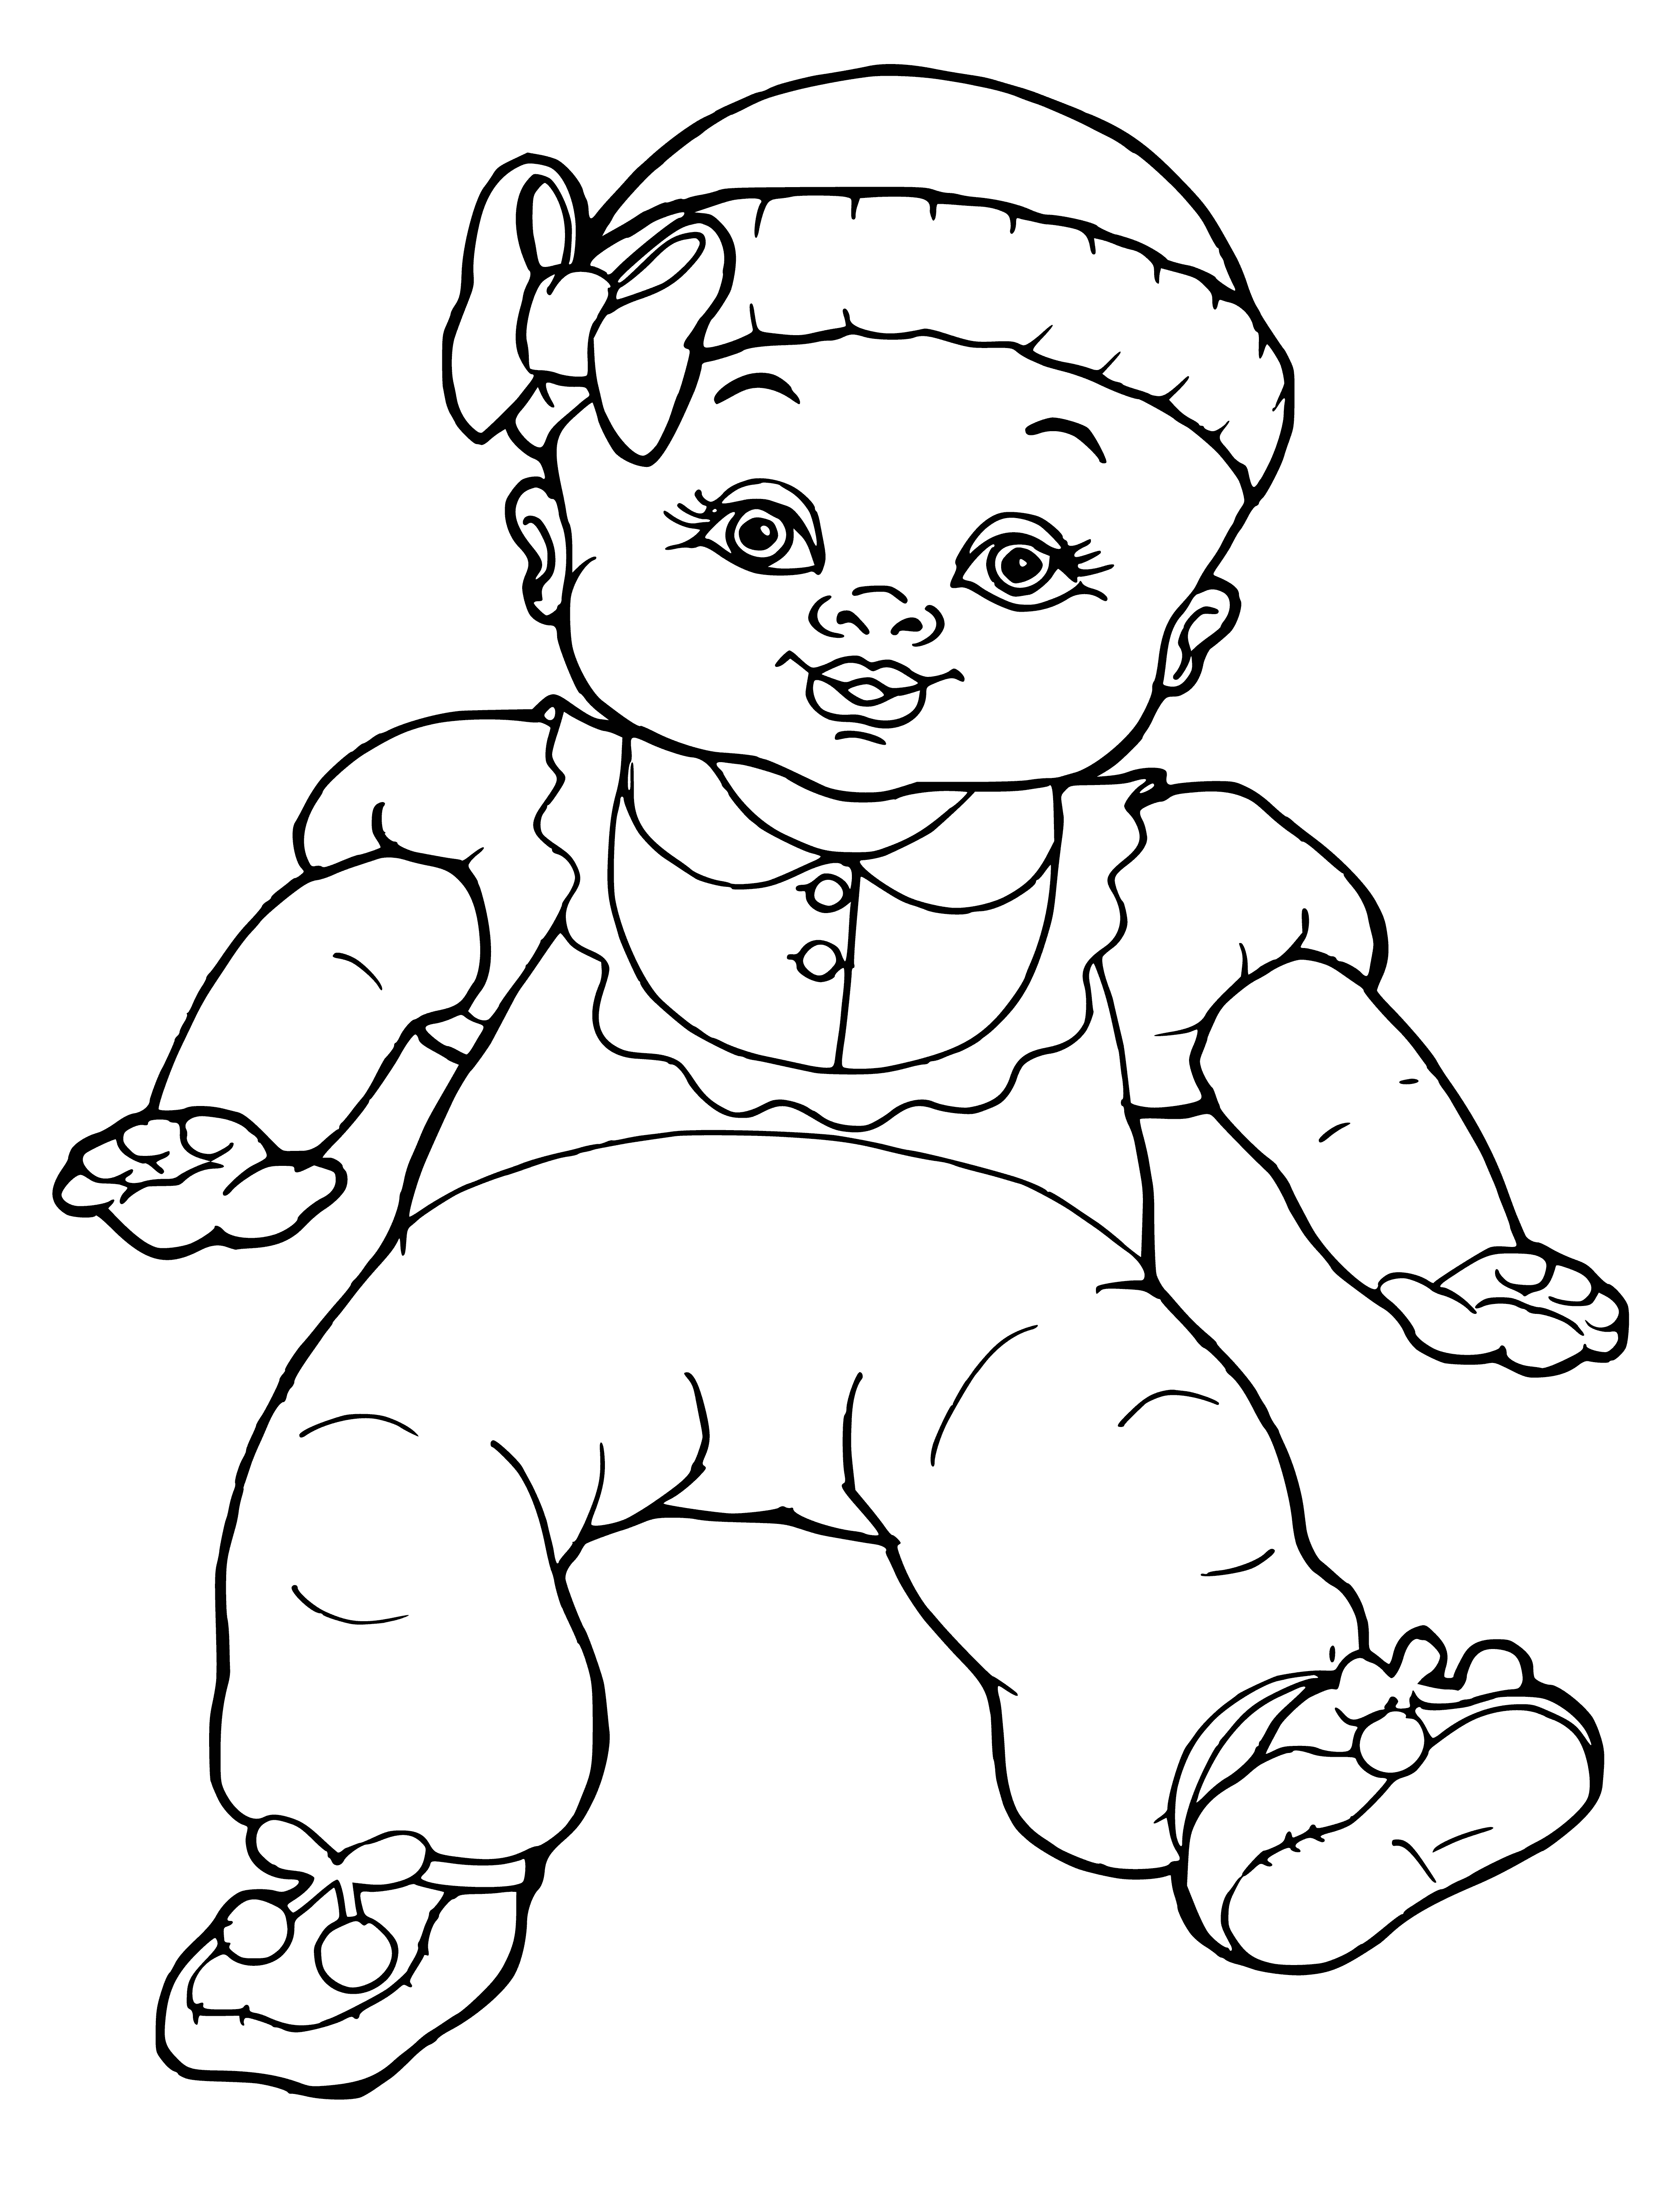 coloring page: Baby grasps neck of giraffe toy, lying on pink blanket, looking up adorably.